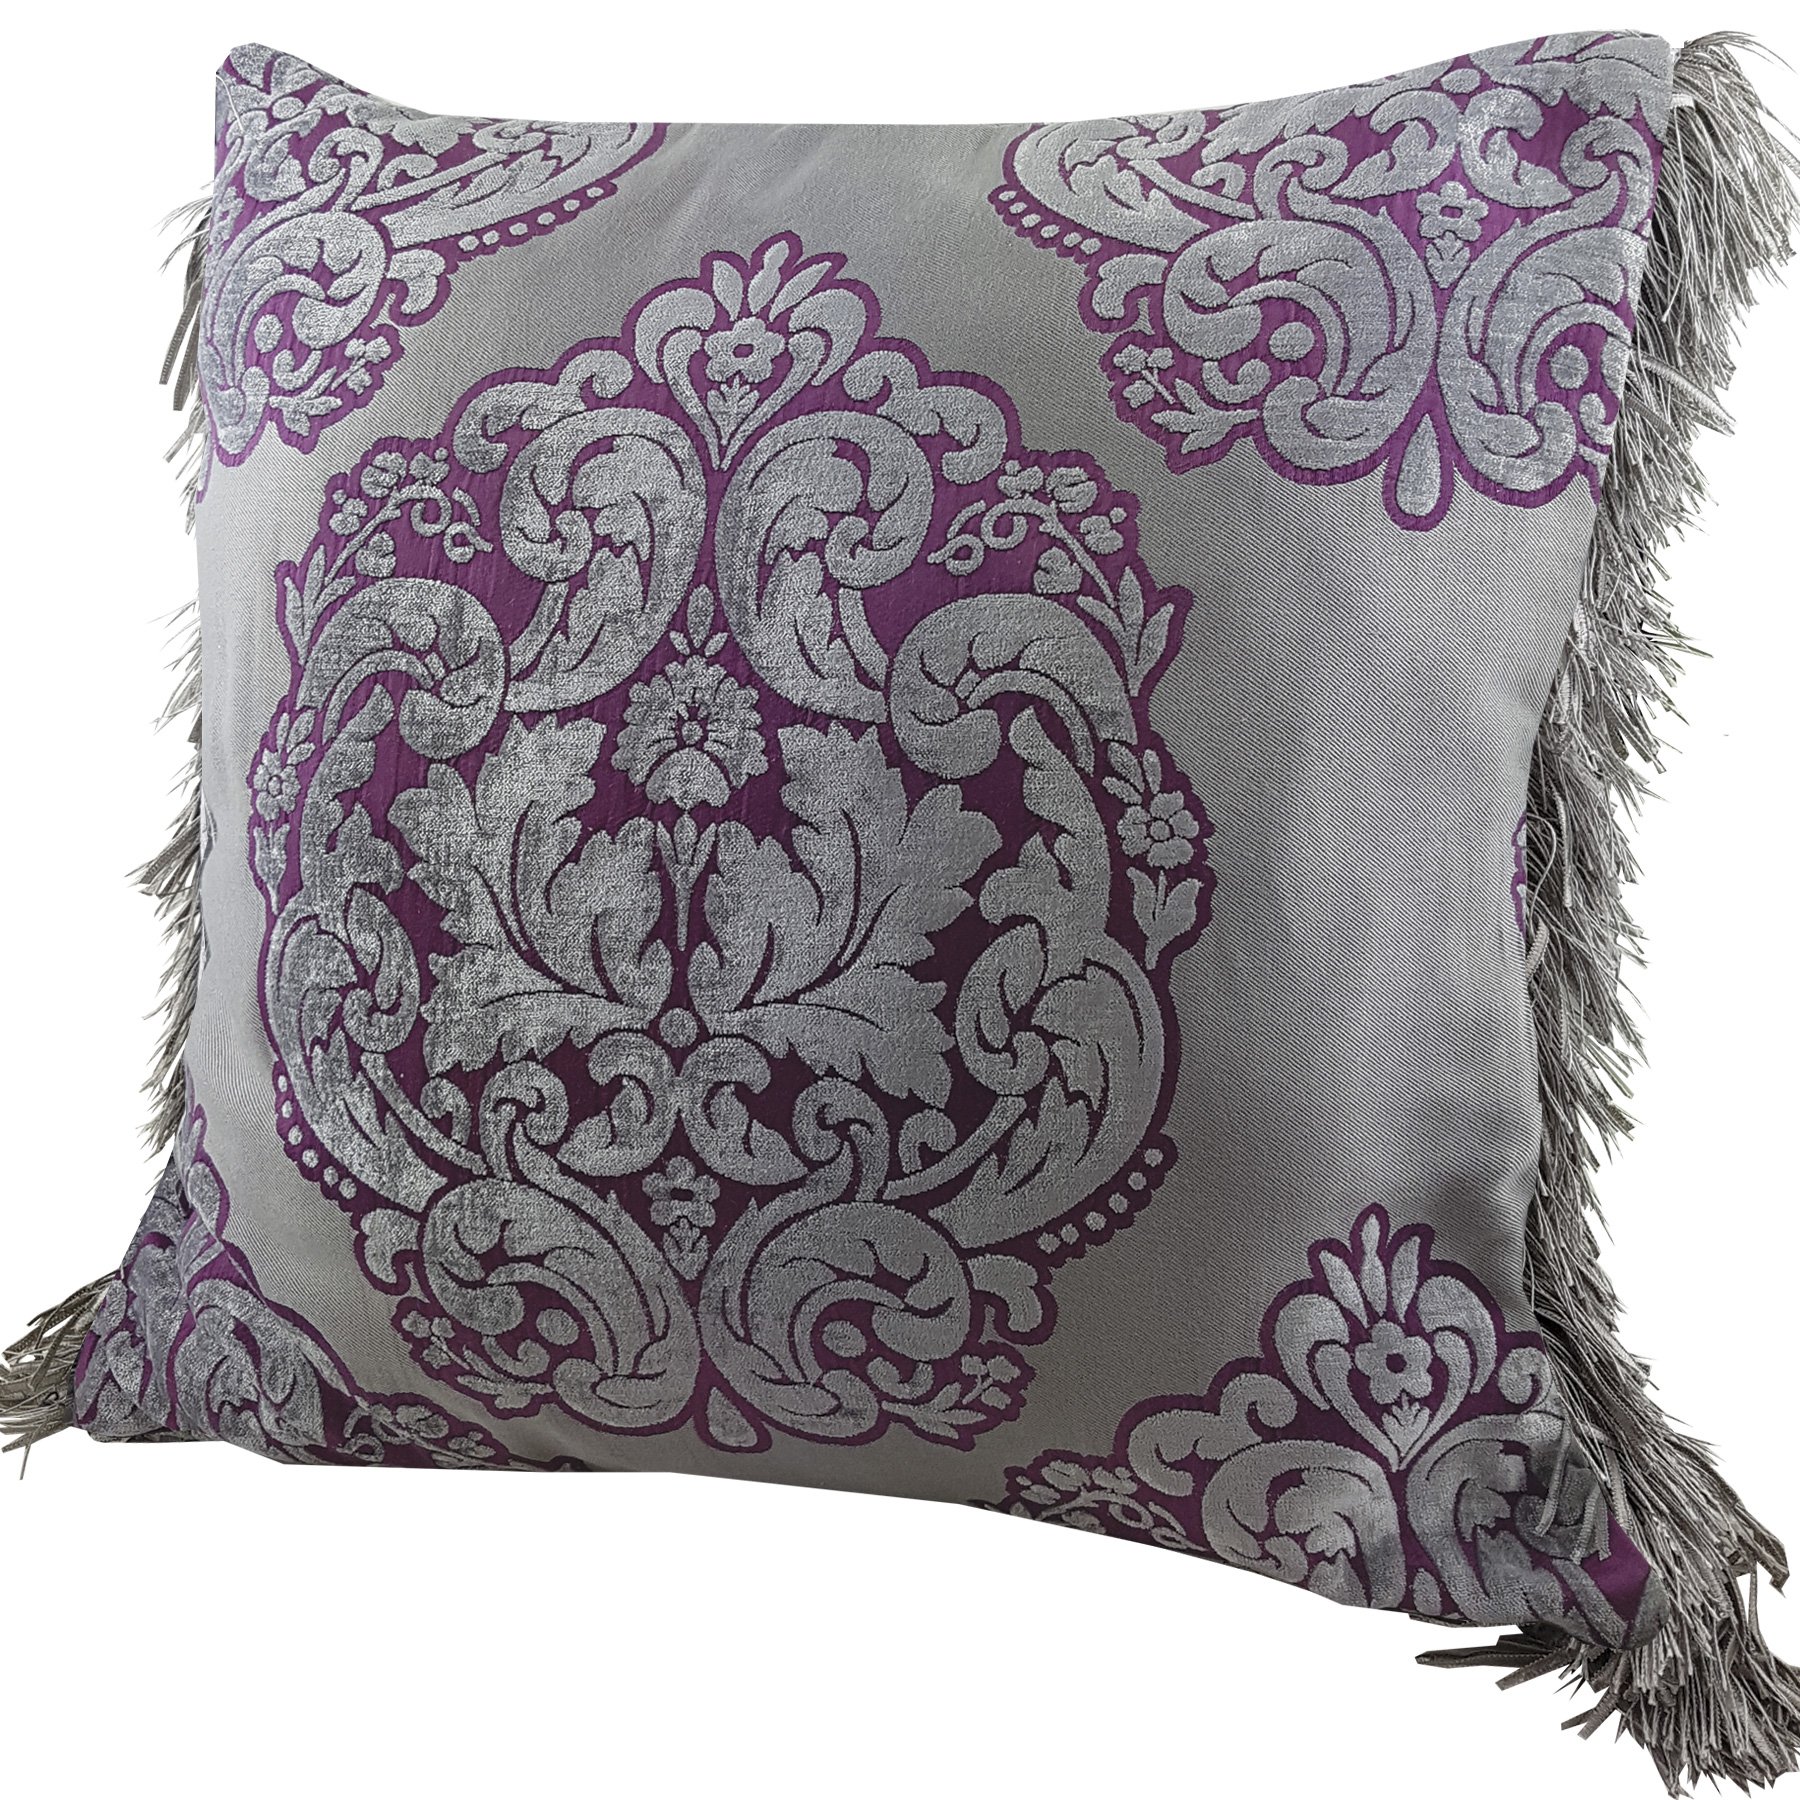 Pair ofChenille cushion covers 45cm x 45cm - French Fuchsia / Taupe colour trimmed with matching ruche